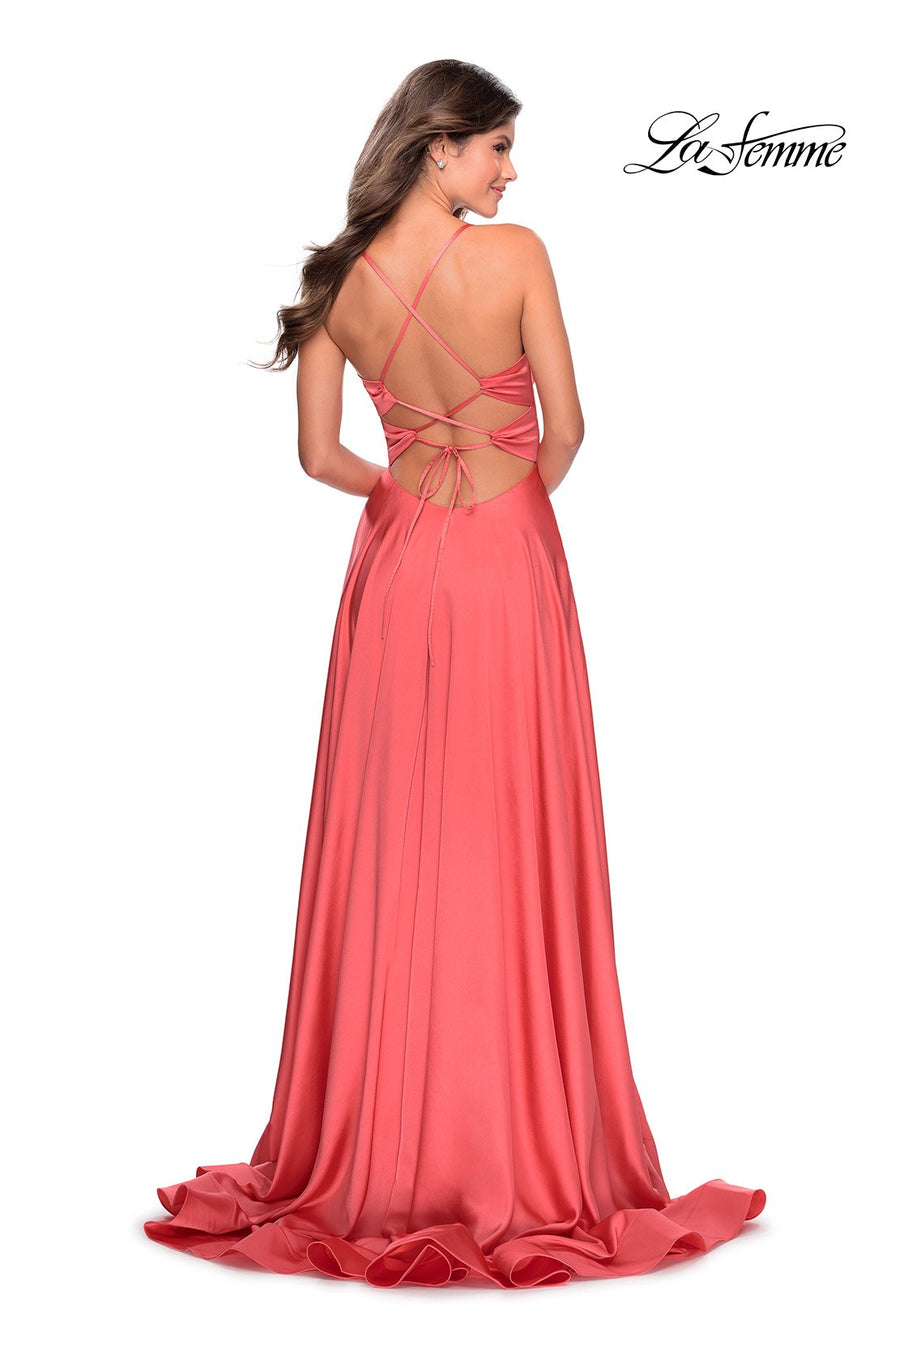 La Femme 28571 prom dress images.  La Femme 28571 is available in these colors: Coral, Royal Blue, Teal, Wine, Yellow.